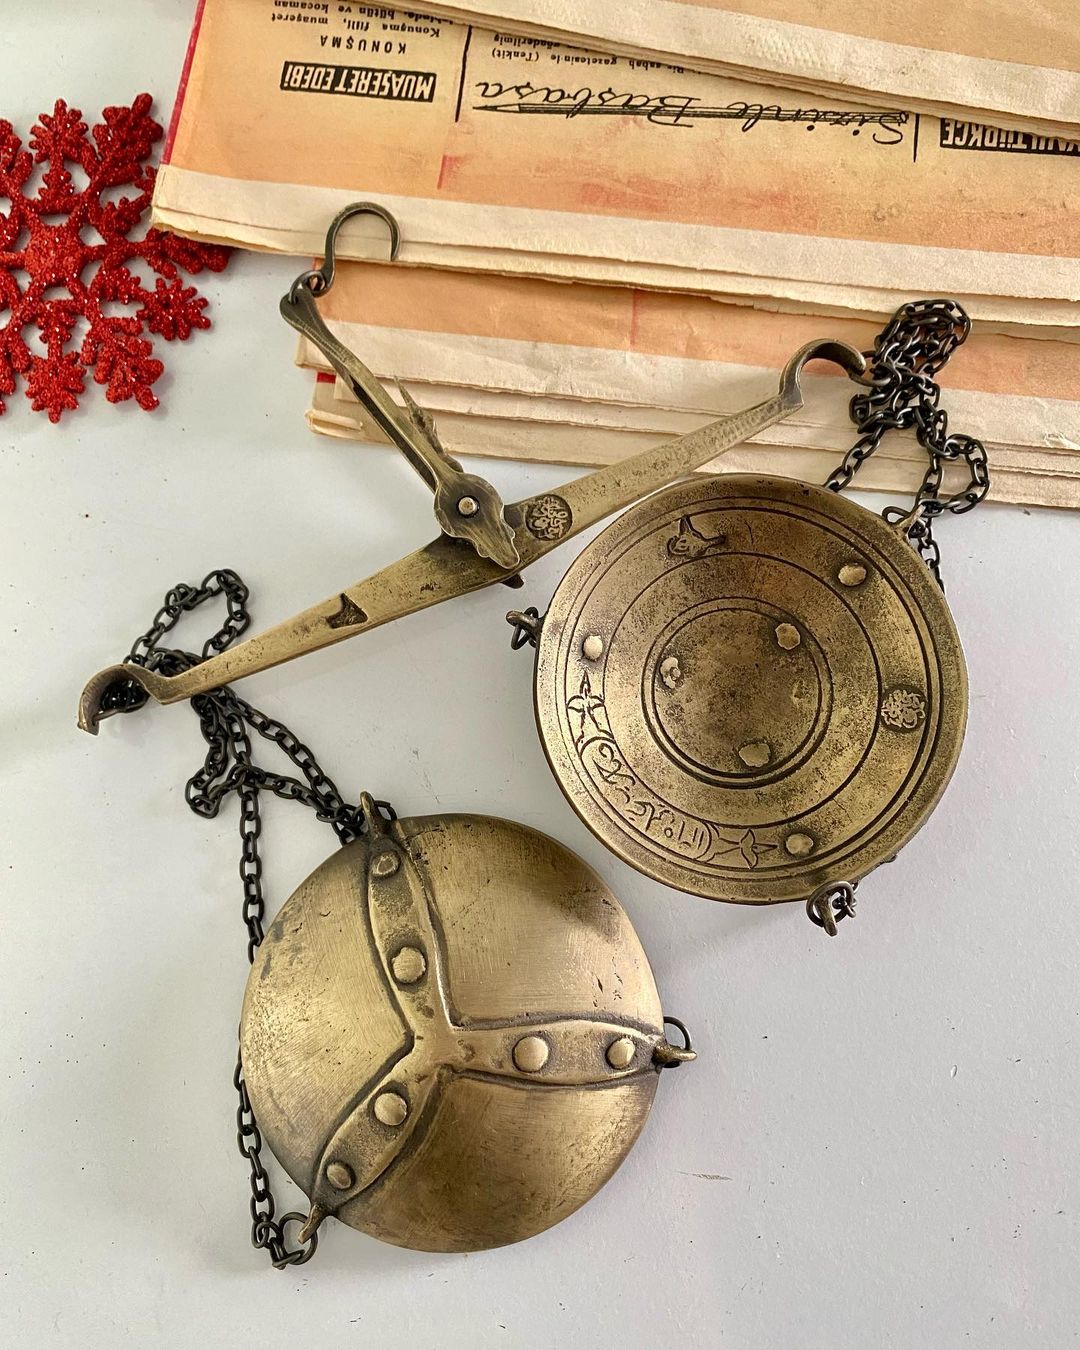 Collectible jeweler's scale made of brass material